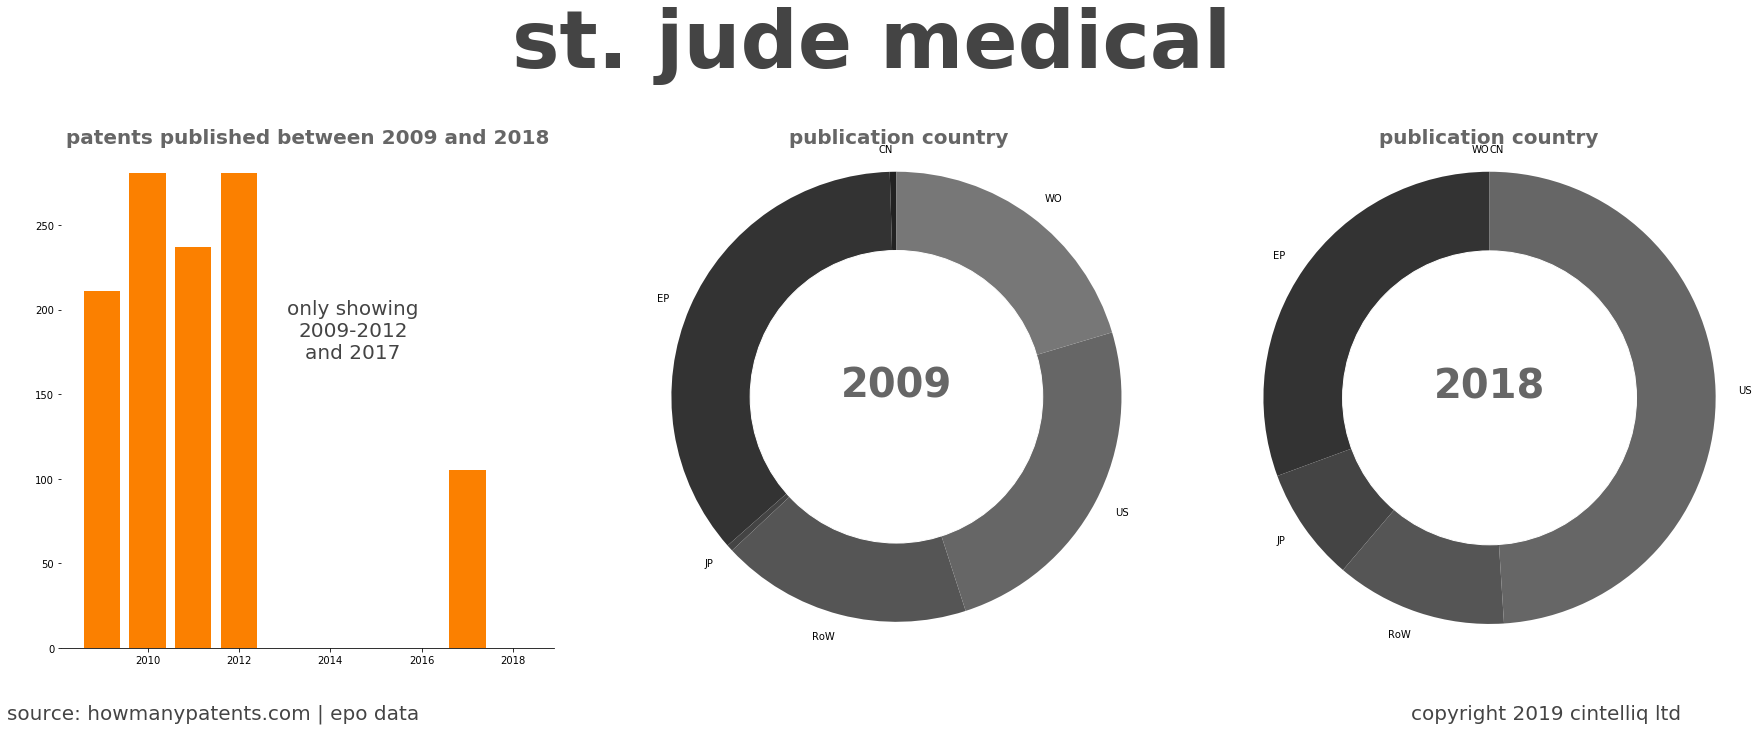 summary of patents for St. Jude Medical